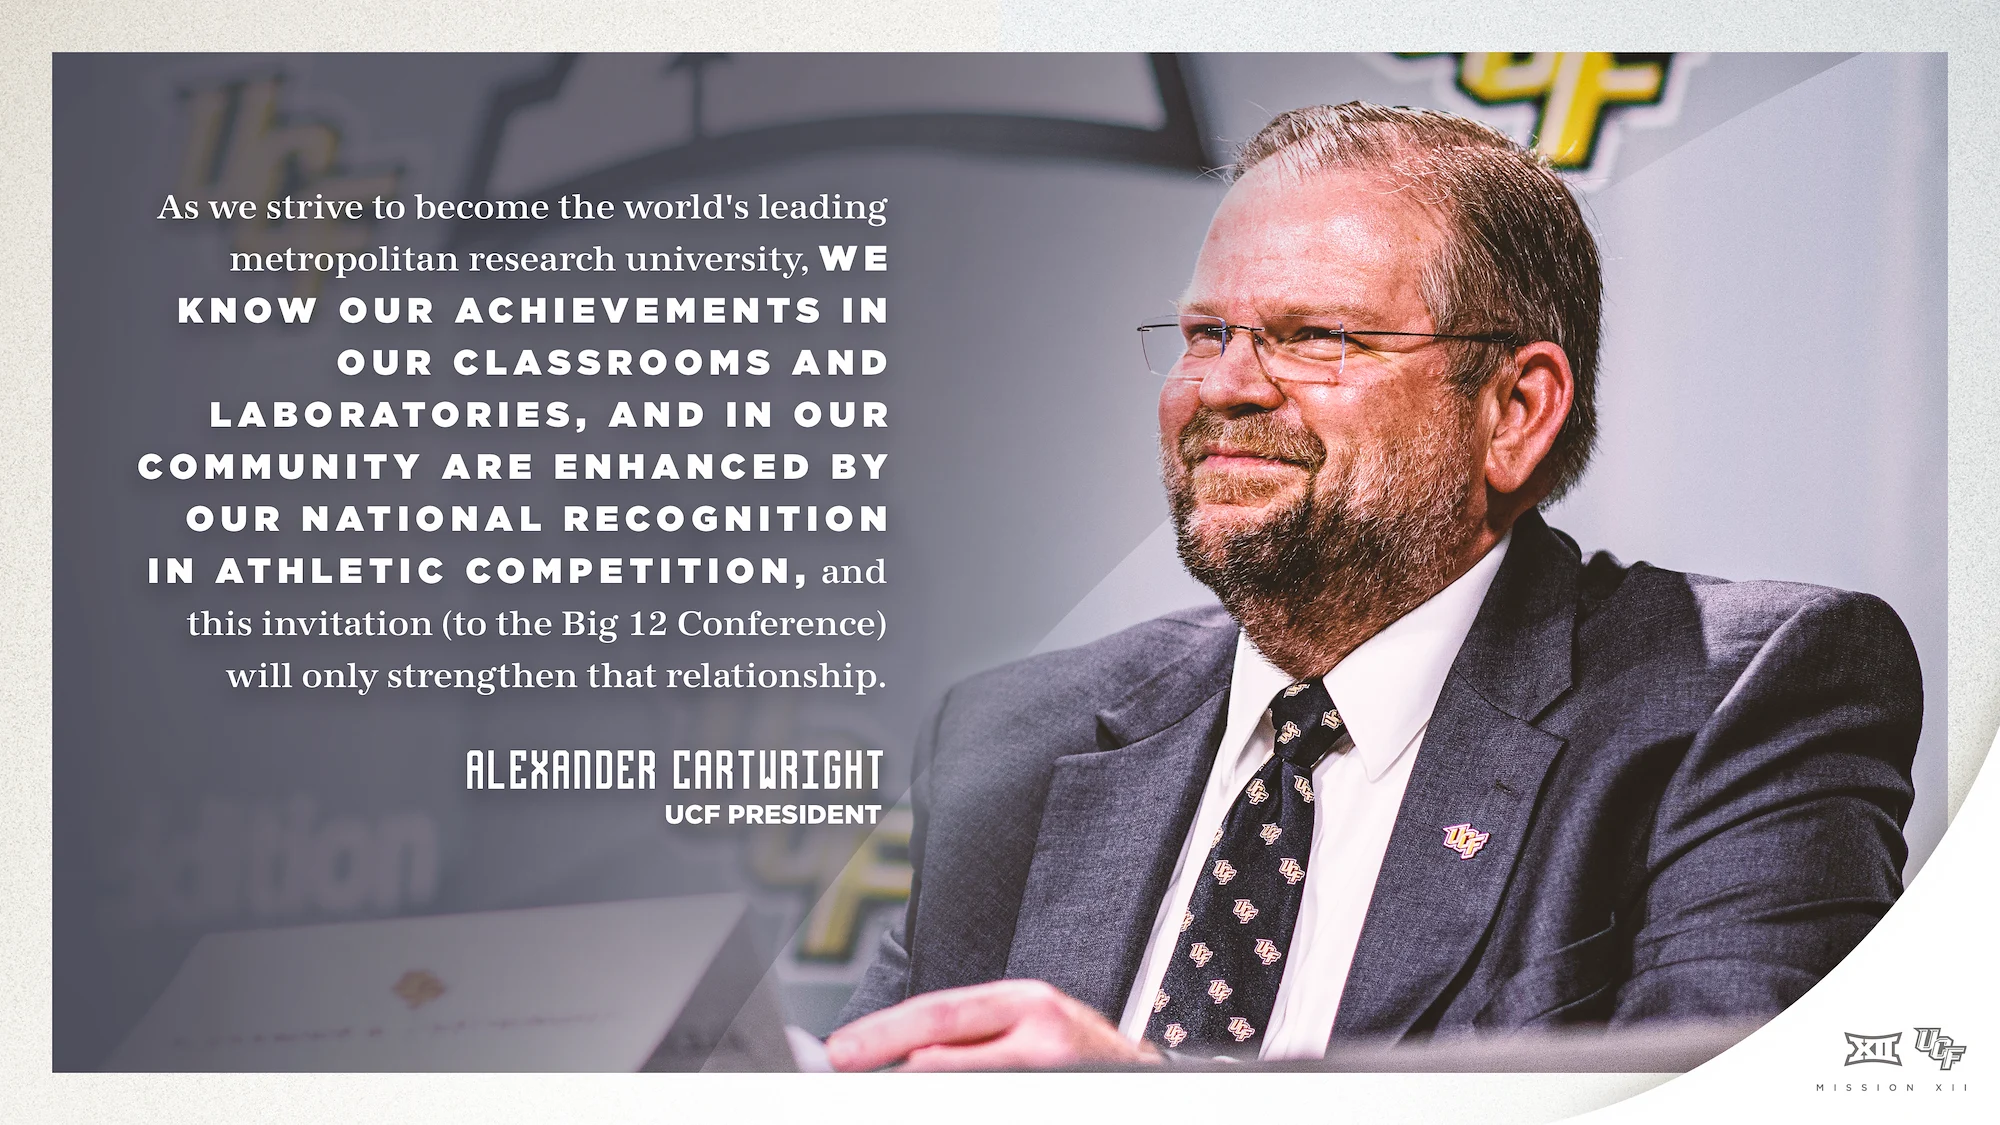 Alexander Cartwright UCF President quote